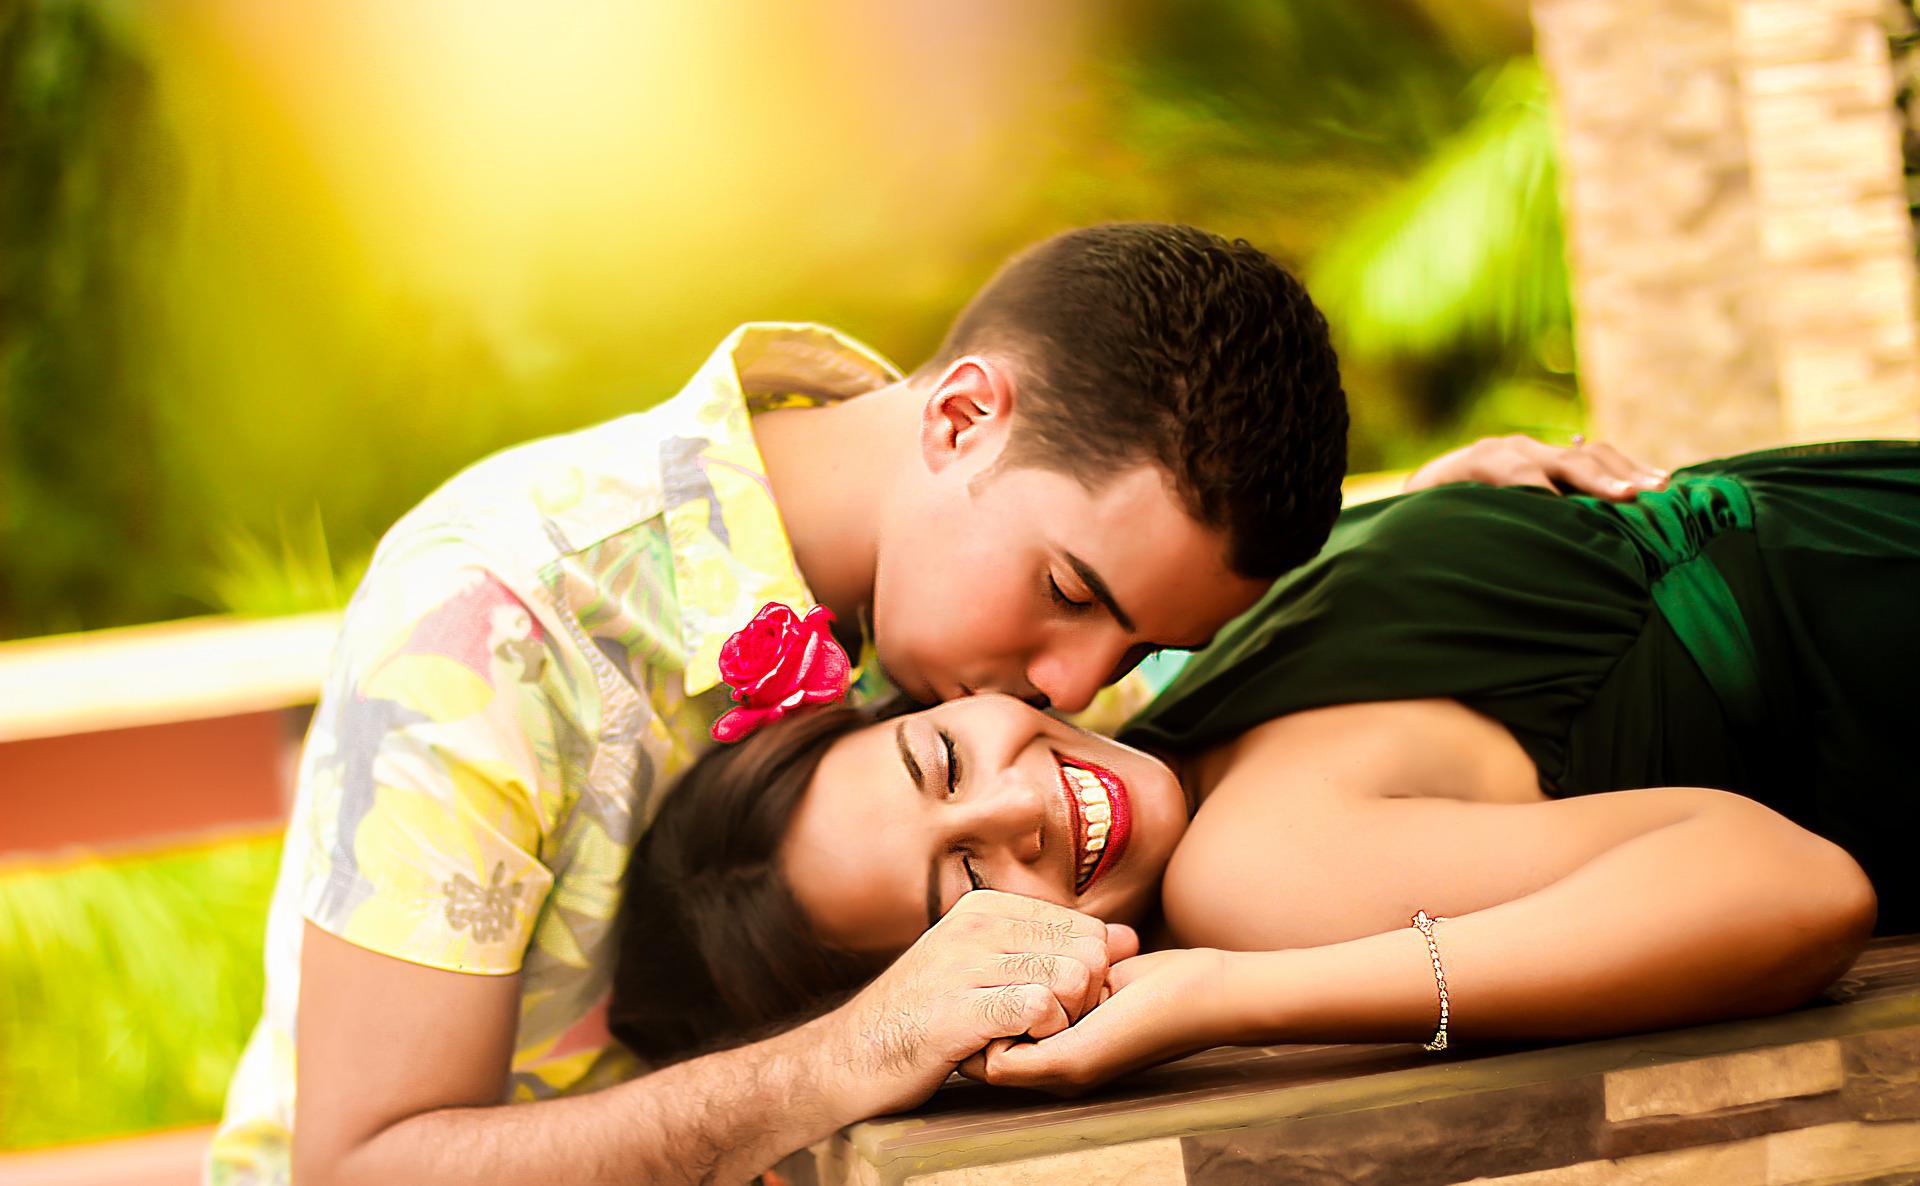 A man kissing his girlfriend lying on a wooden table